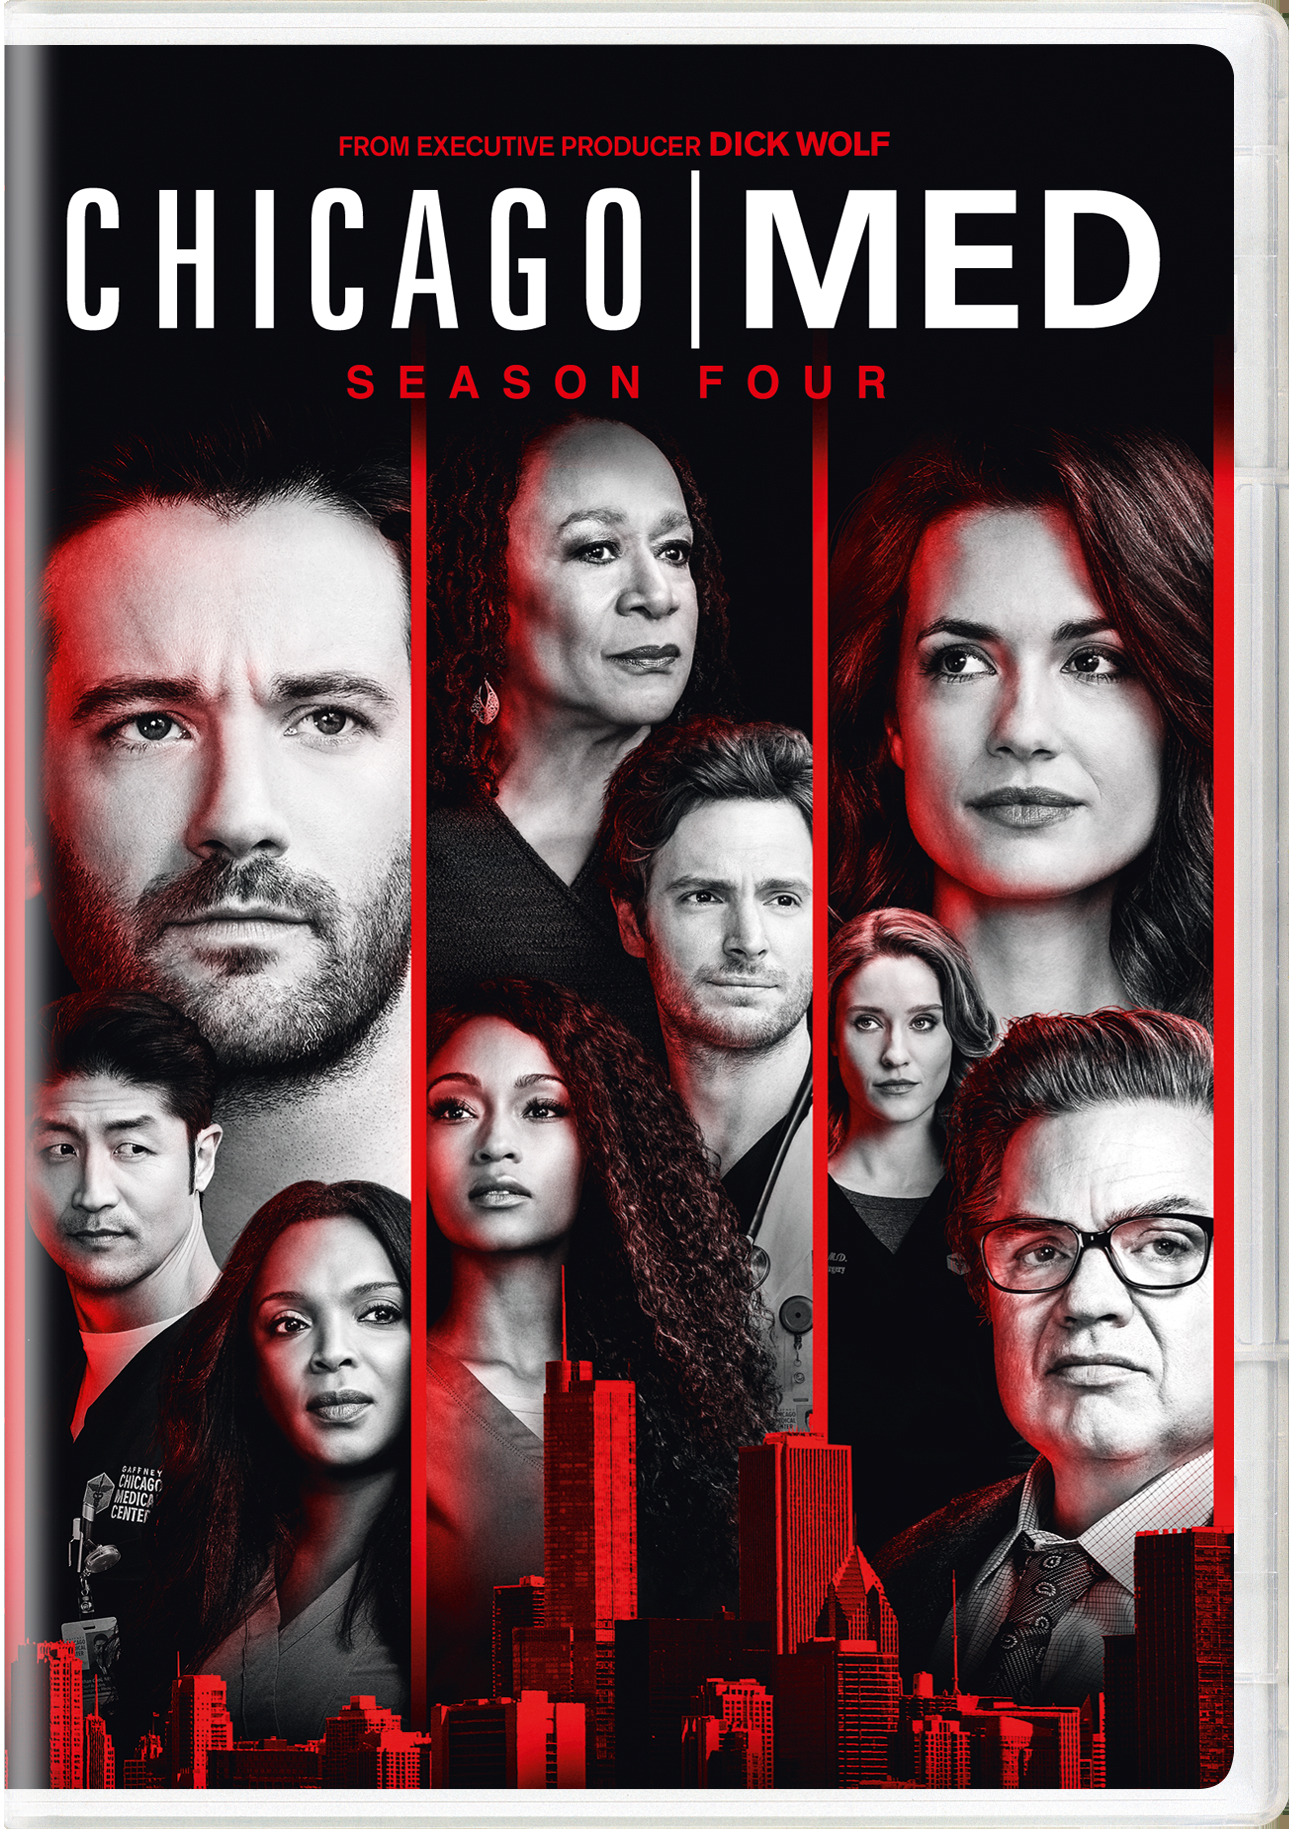 Chicago Med: Season Four - DVD   - Drama Television On DVD - TV Shows On GRUV